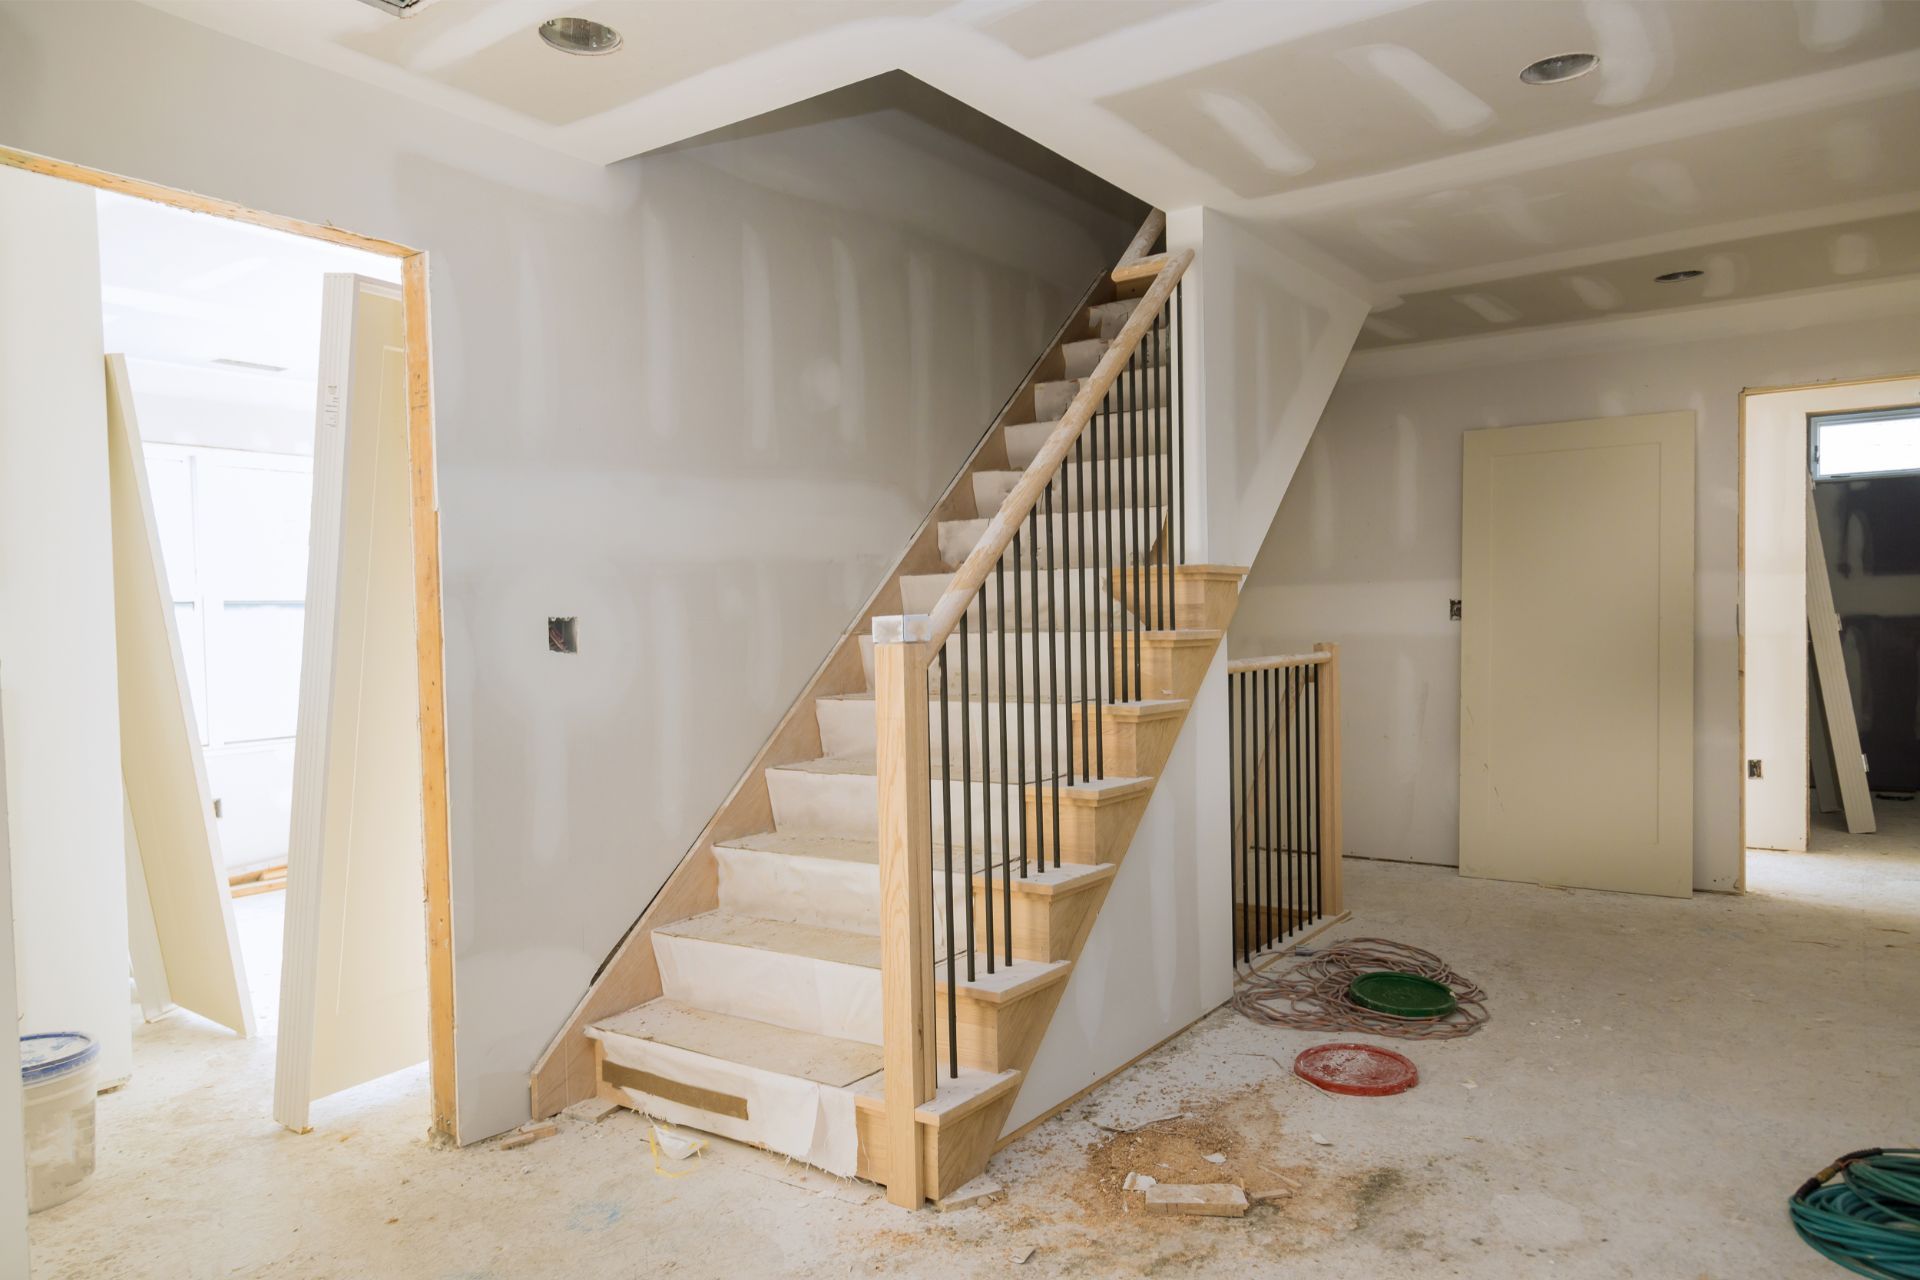 Under-construction staircase with metal balusters in a primed room.